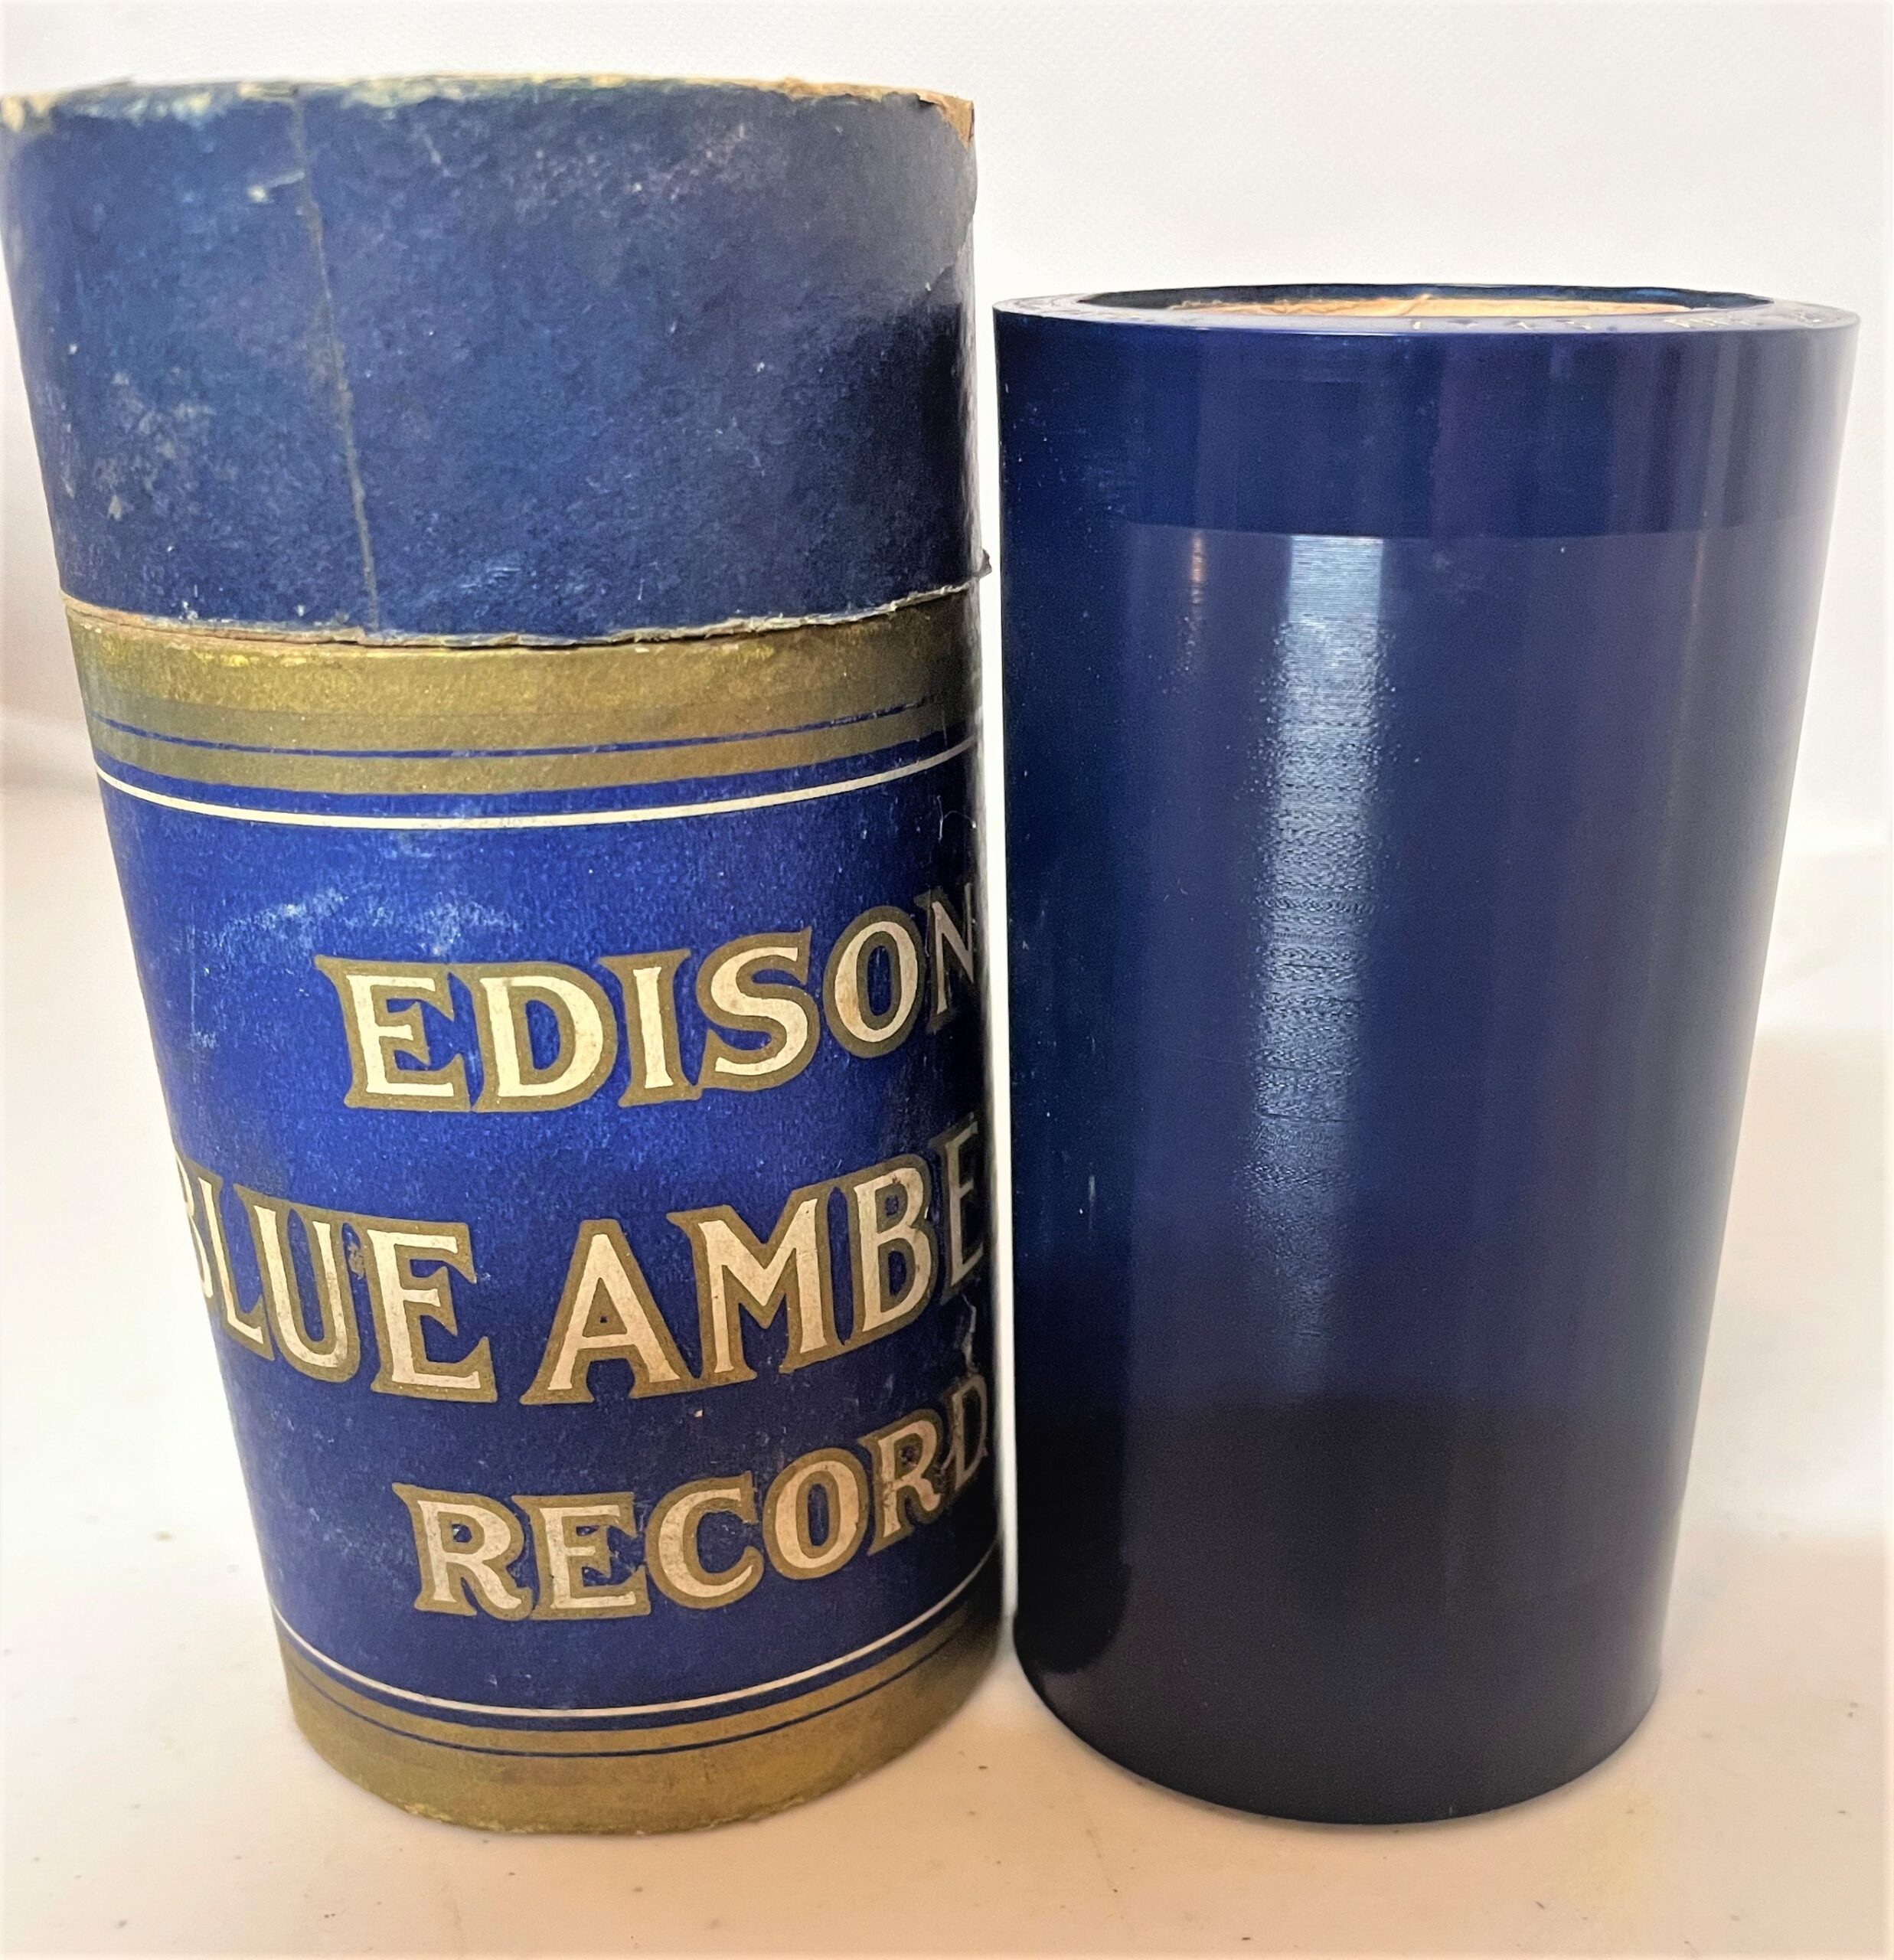 Edison 4 min. Cylinder… “The Insect Powder Agent”